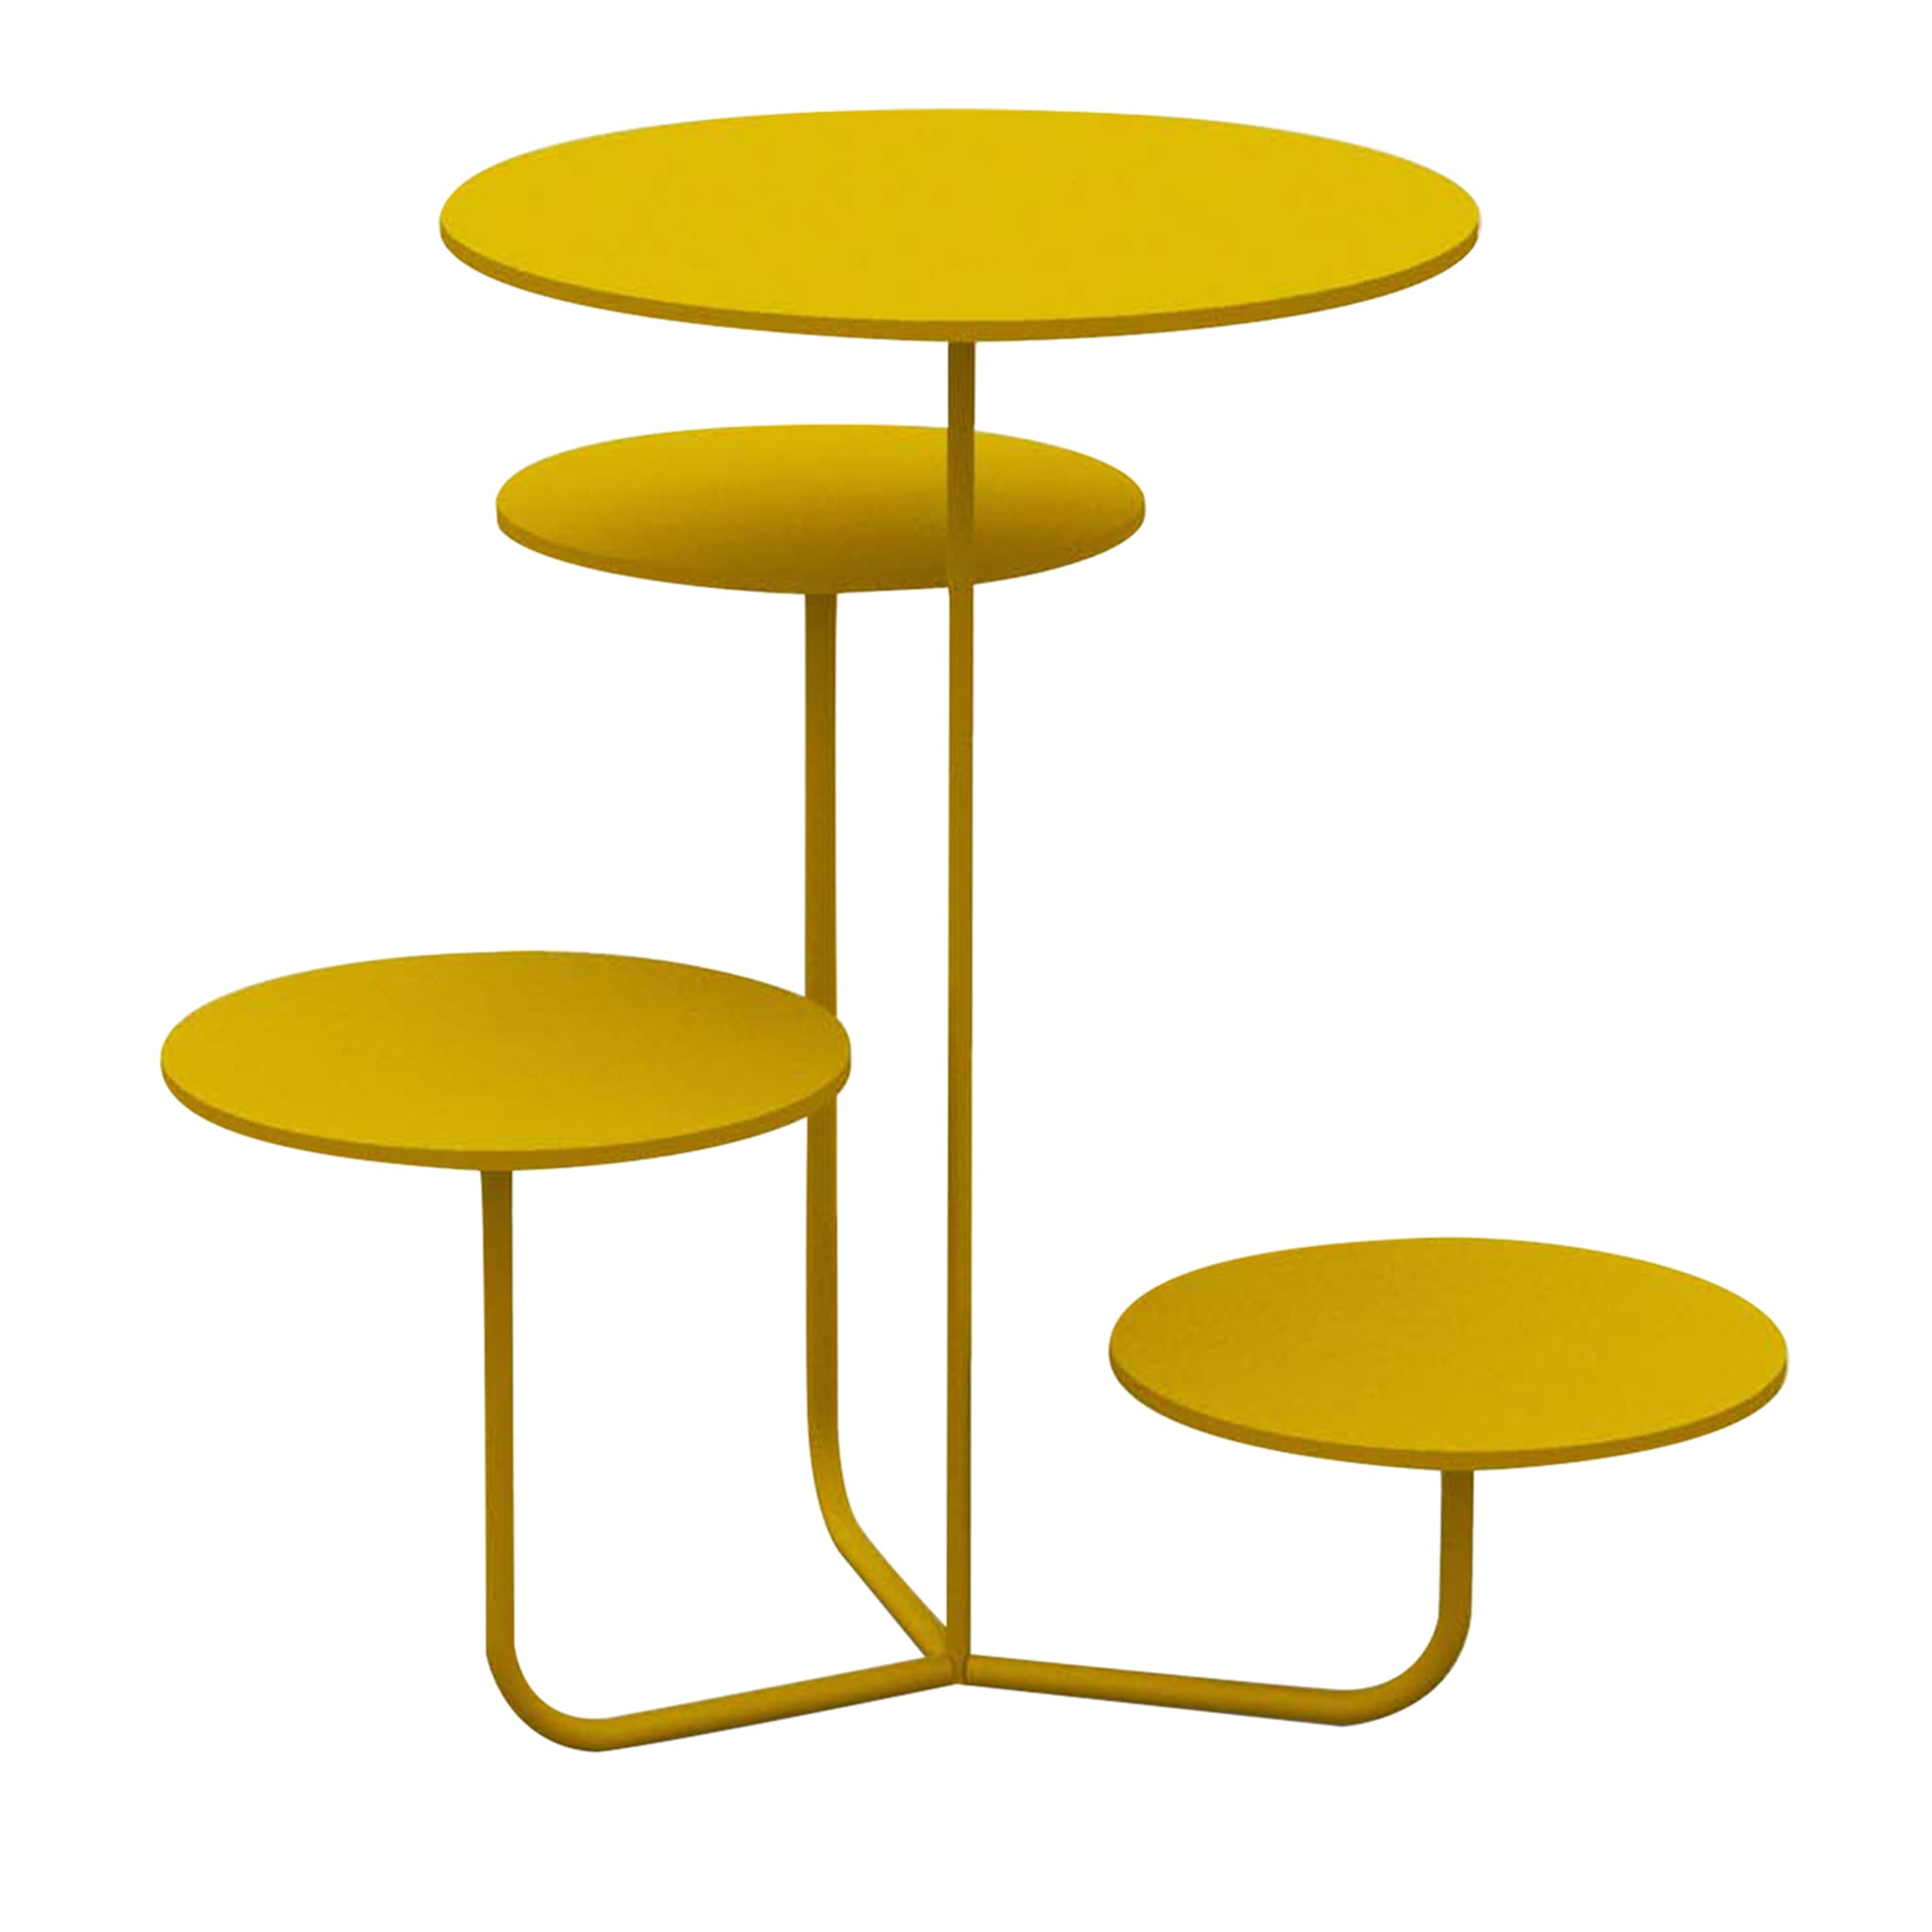 Condiviso 4-Tier Yellow Serving Stand - Main view